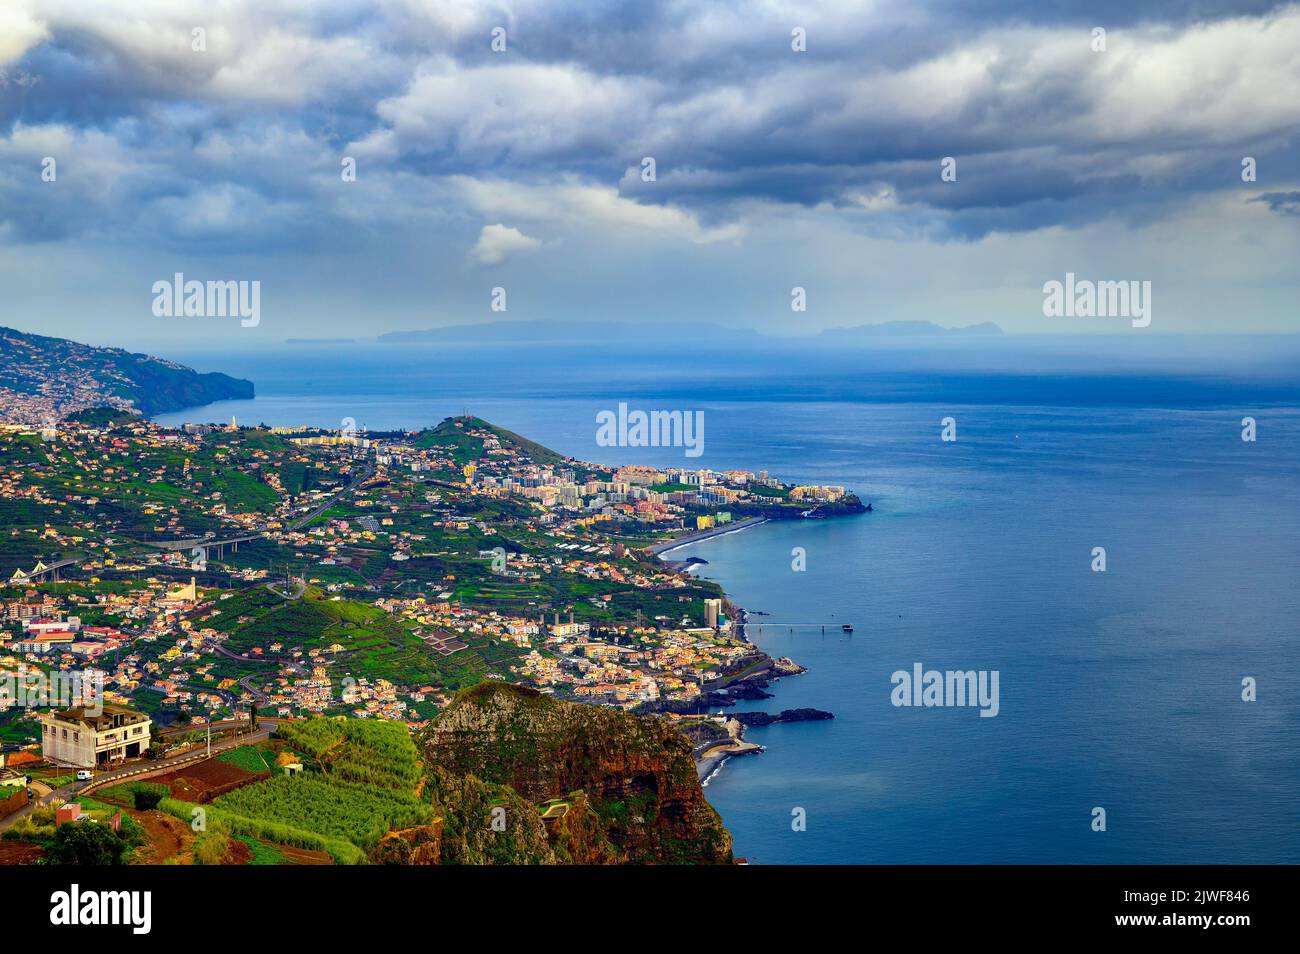 Aerial view of Funchal in the Madeira Islands, Portugal Stock Photo